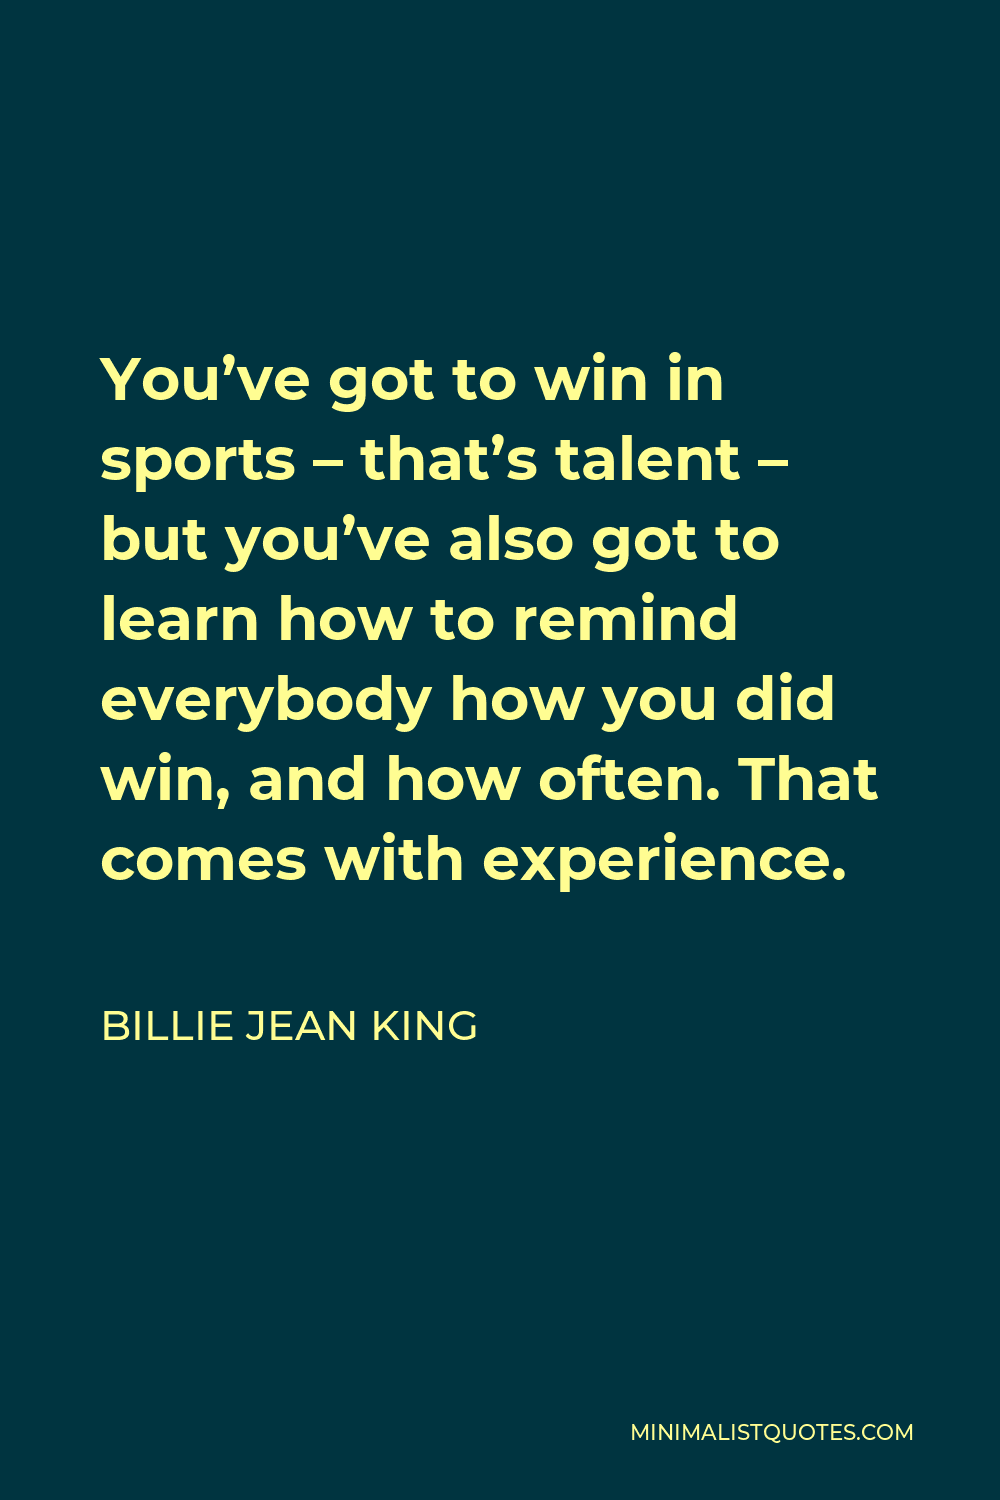 Billie Jean King Quote - You’ve got to win in sports – that’s talent – but you’ve also got to learn how to remind everybody how you did win, and how often. That comes with experience.